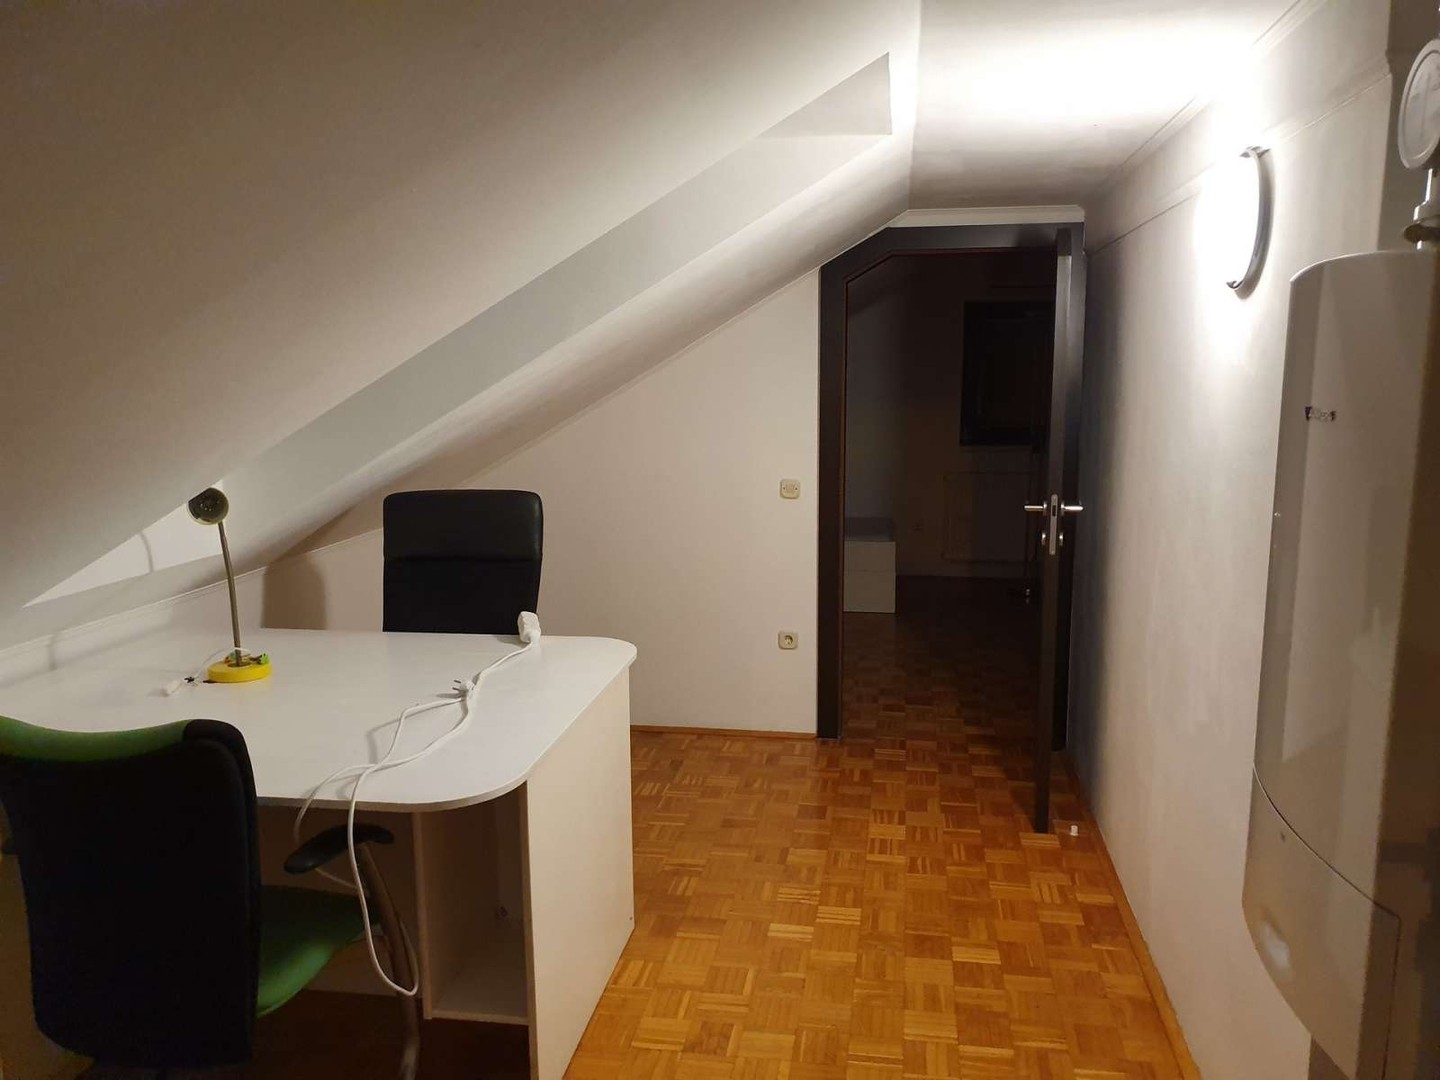 Renting rooms by the month in ljubljana